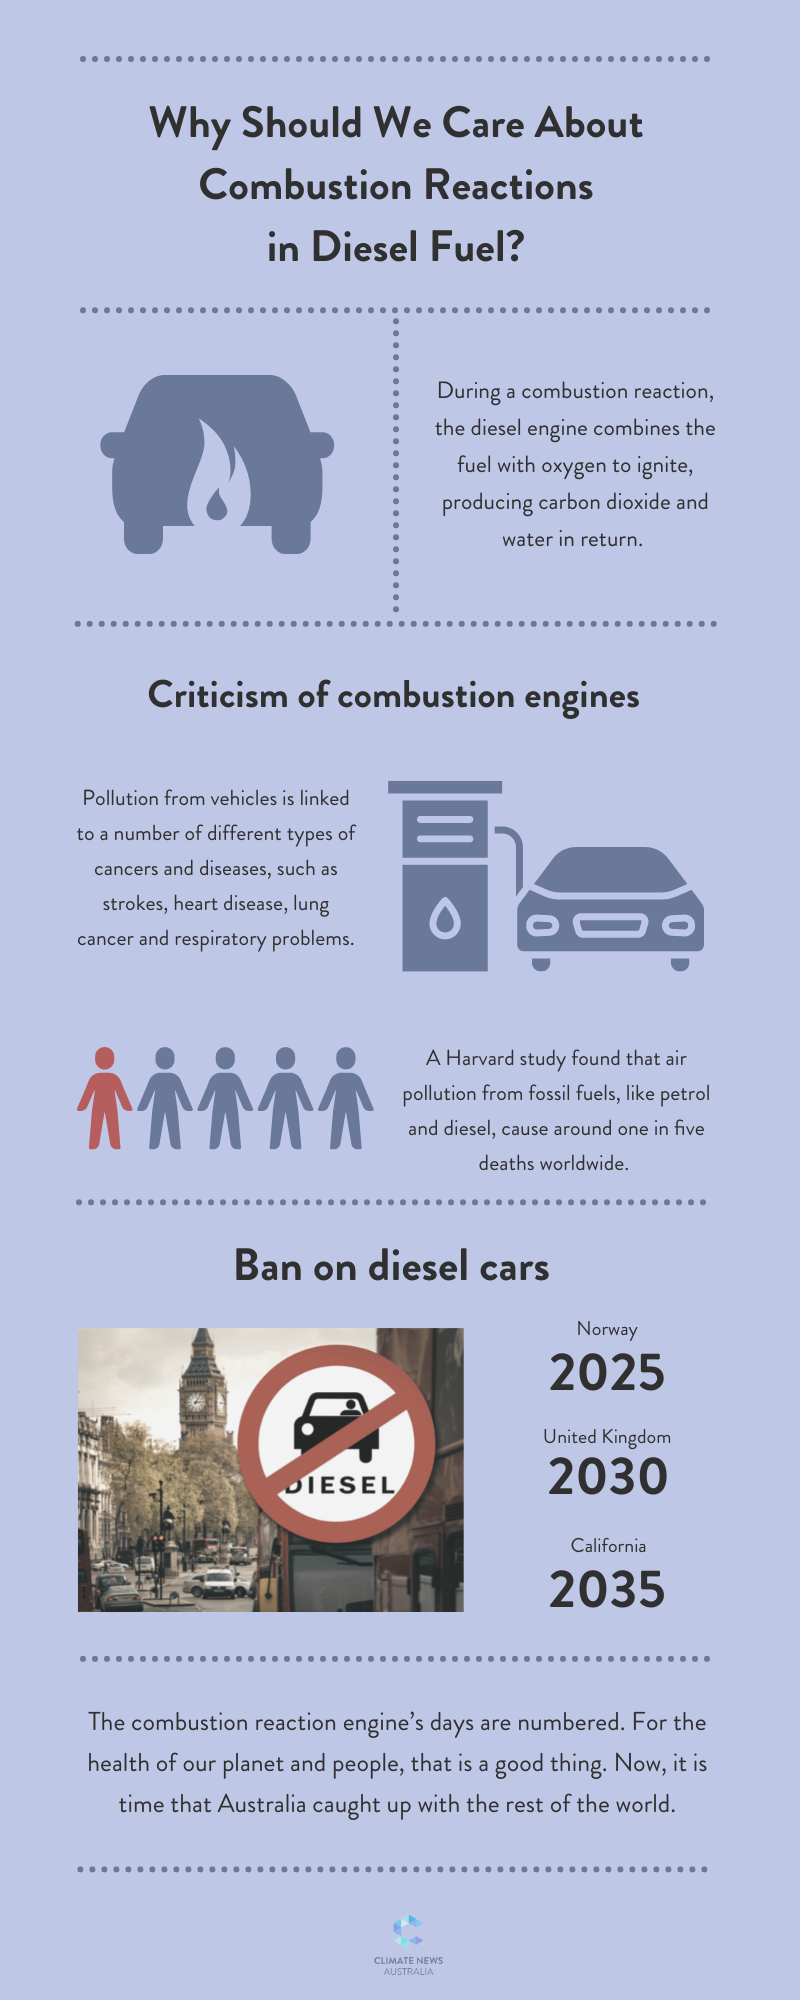 Infographic about combustion reactions in diesel fuel